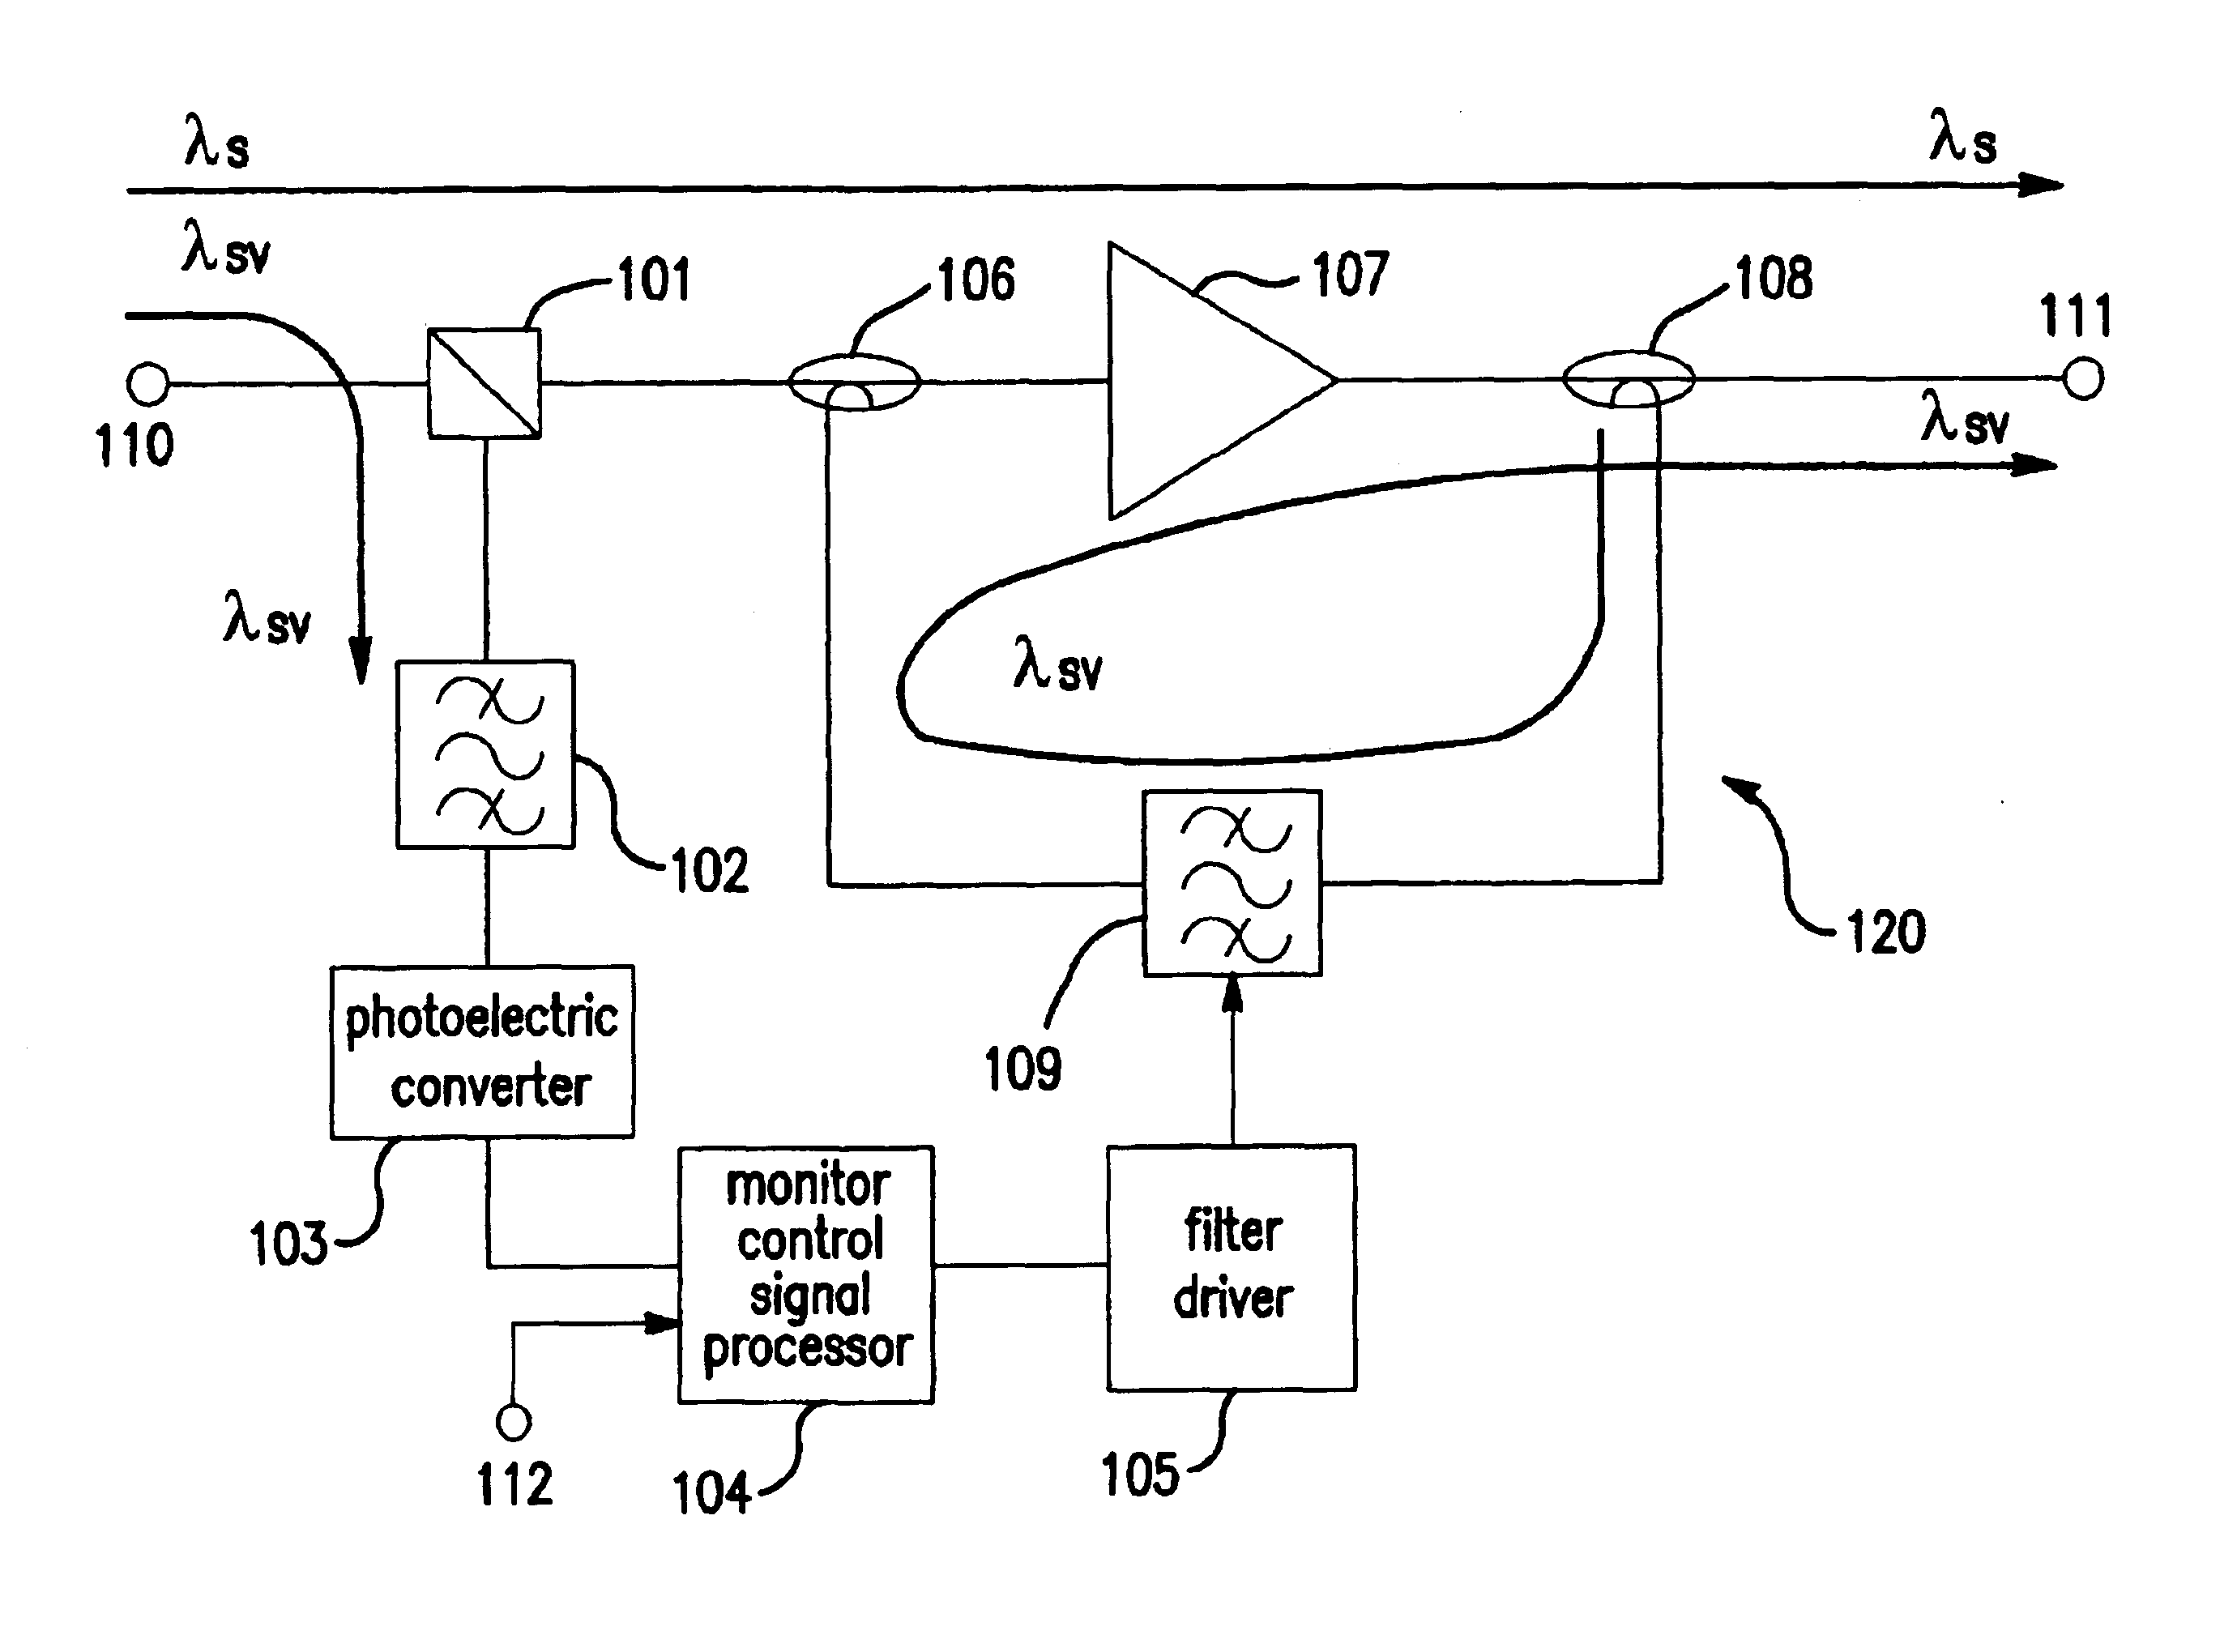 Apparatus for transferring monitor signals in photo-transfer system